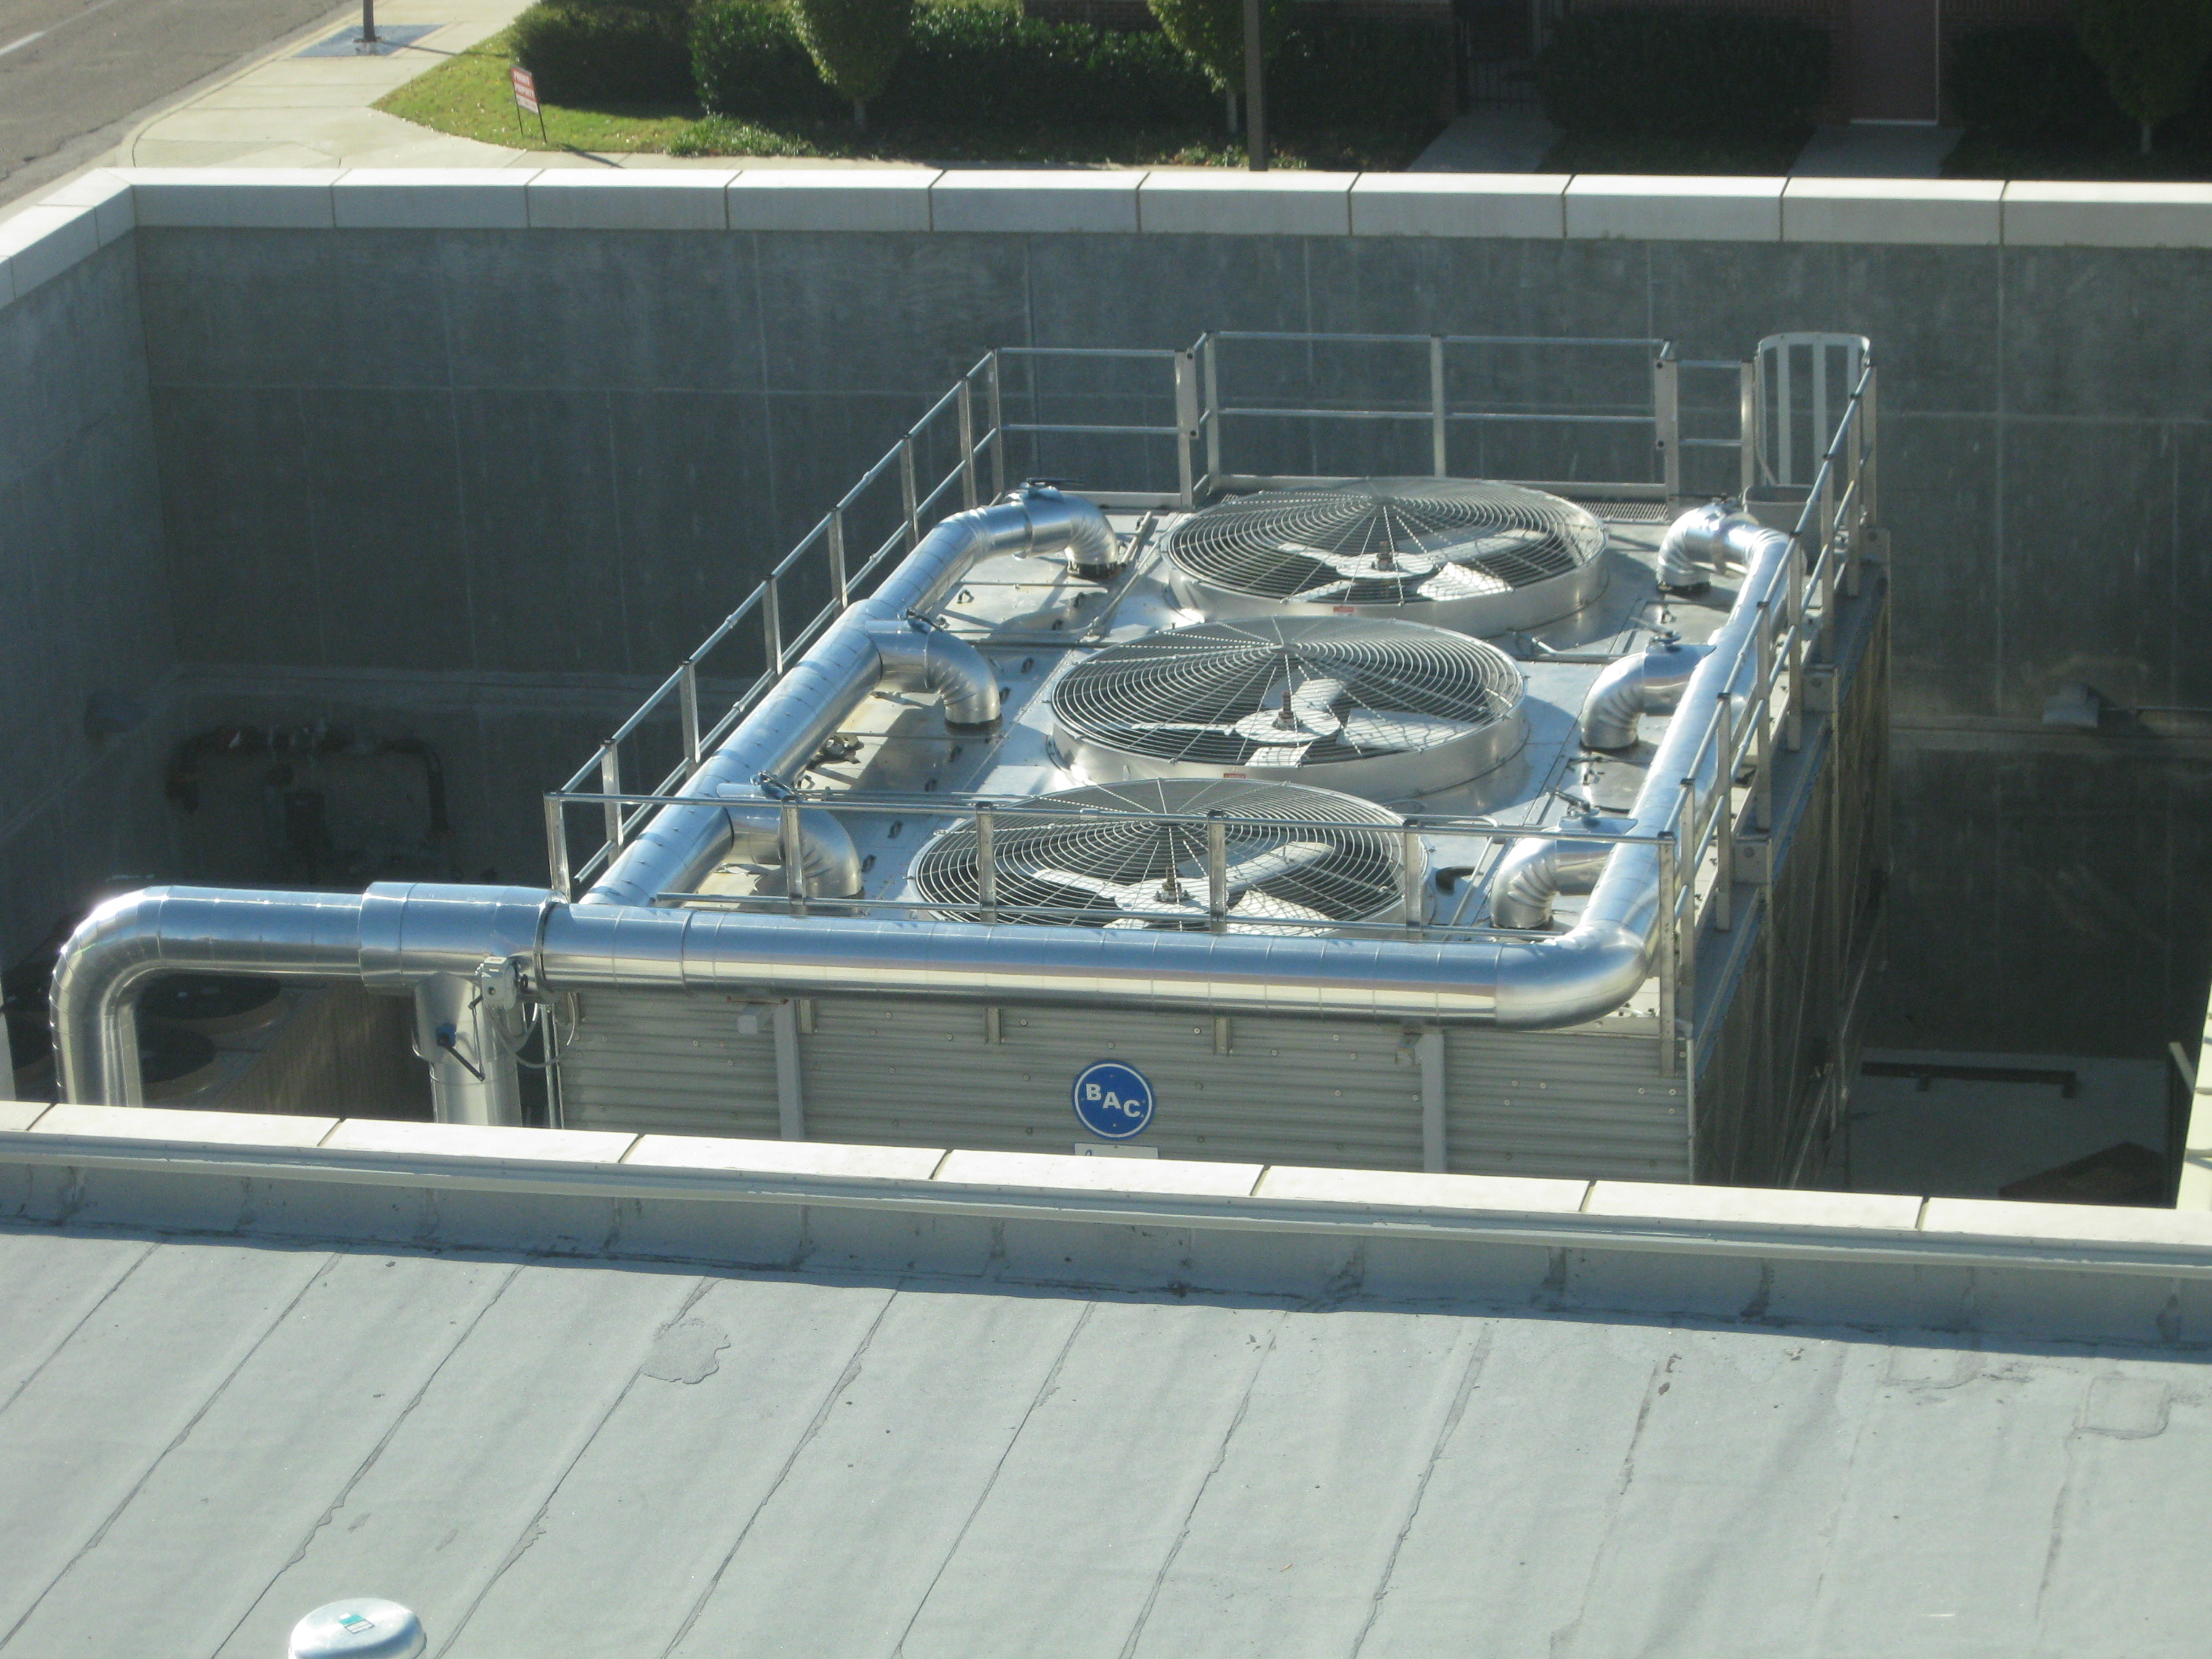 Cooling Tower at University of Tennessee Translational Sciences Research